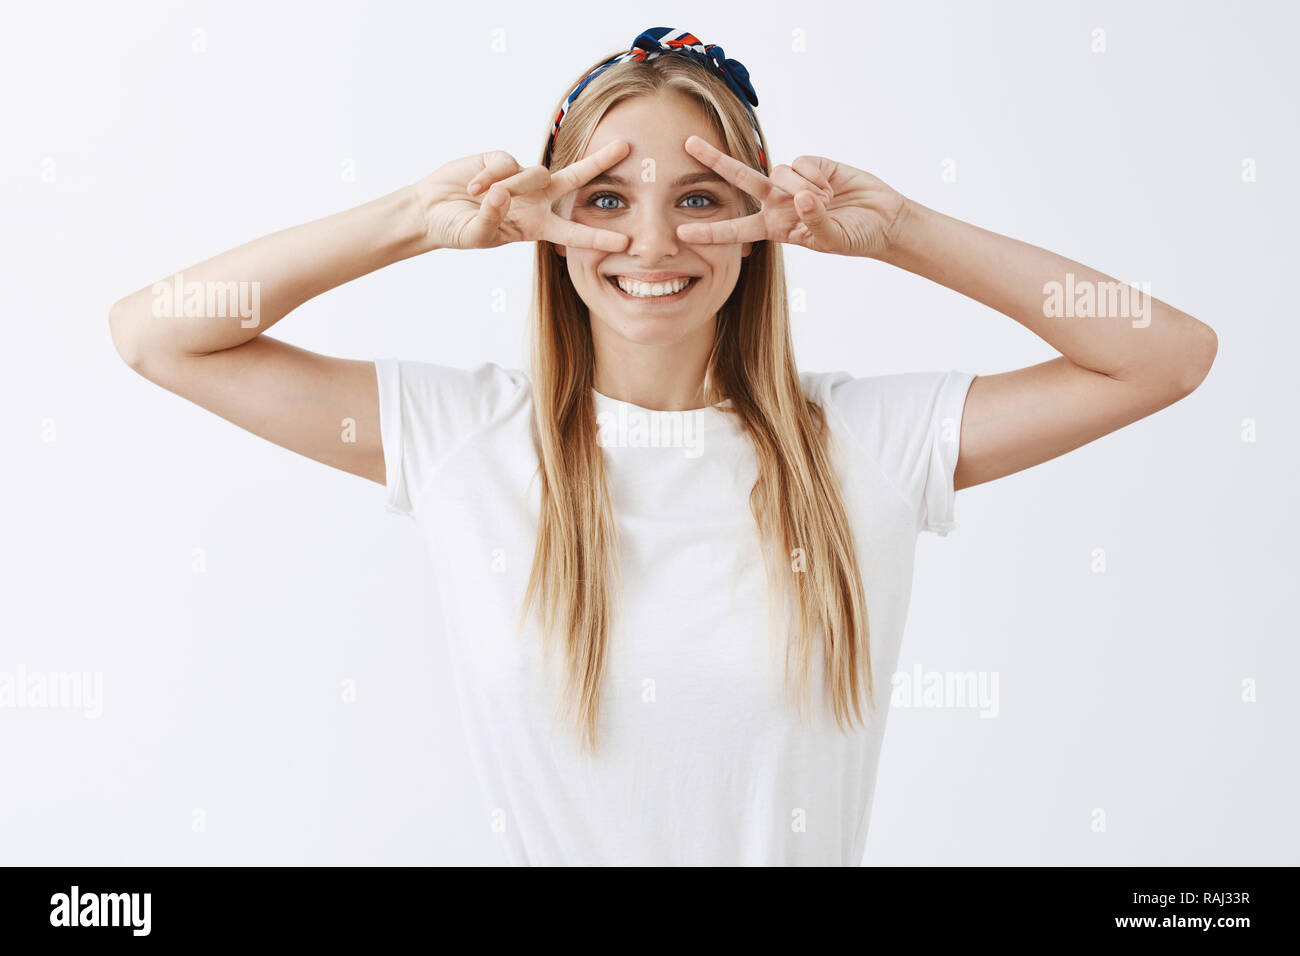 Smile never been so cute. of charming and happy carefree european girl with  blond hair, showing victory or peace signs over eyes and grinning, being in  playful and joyful mood over grey